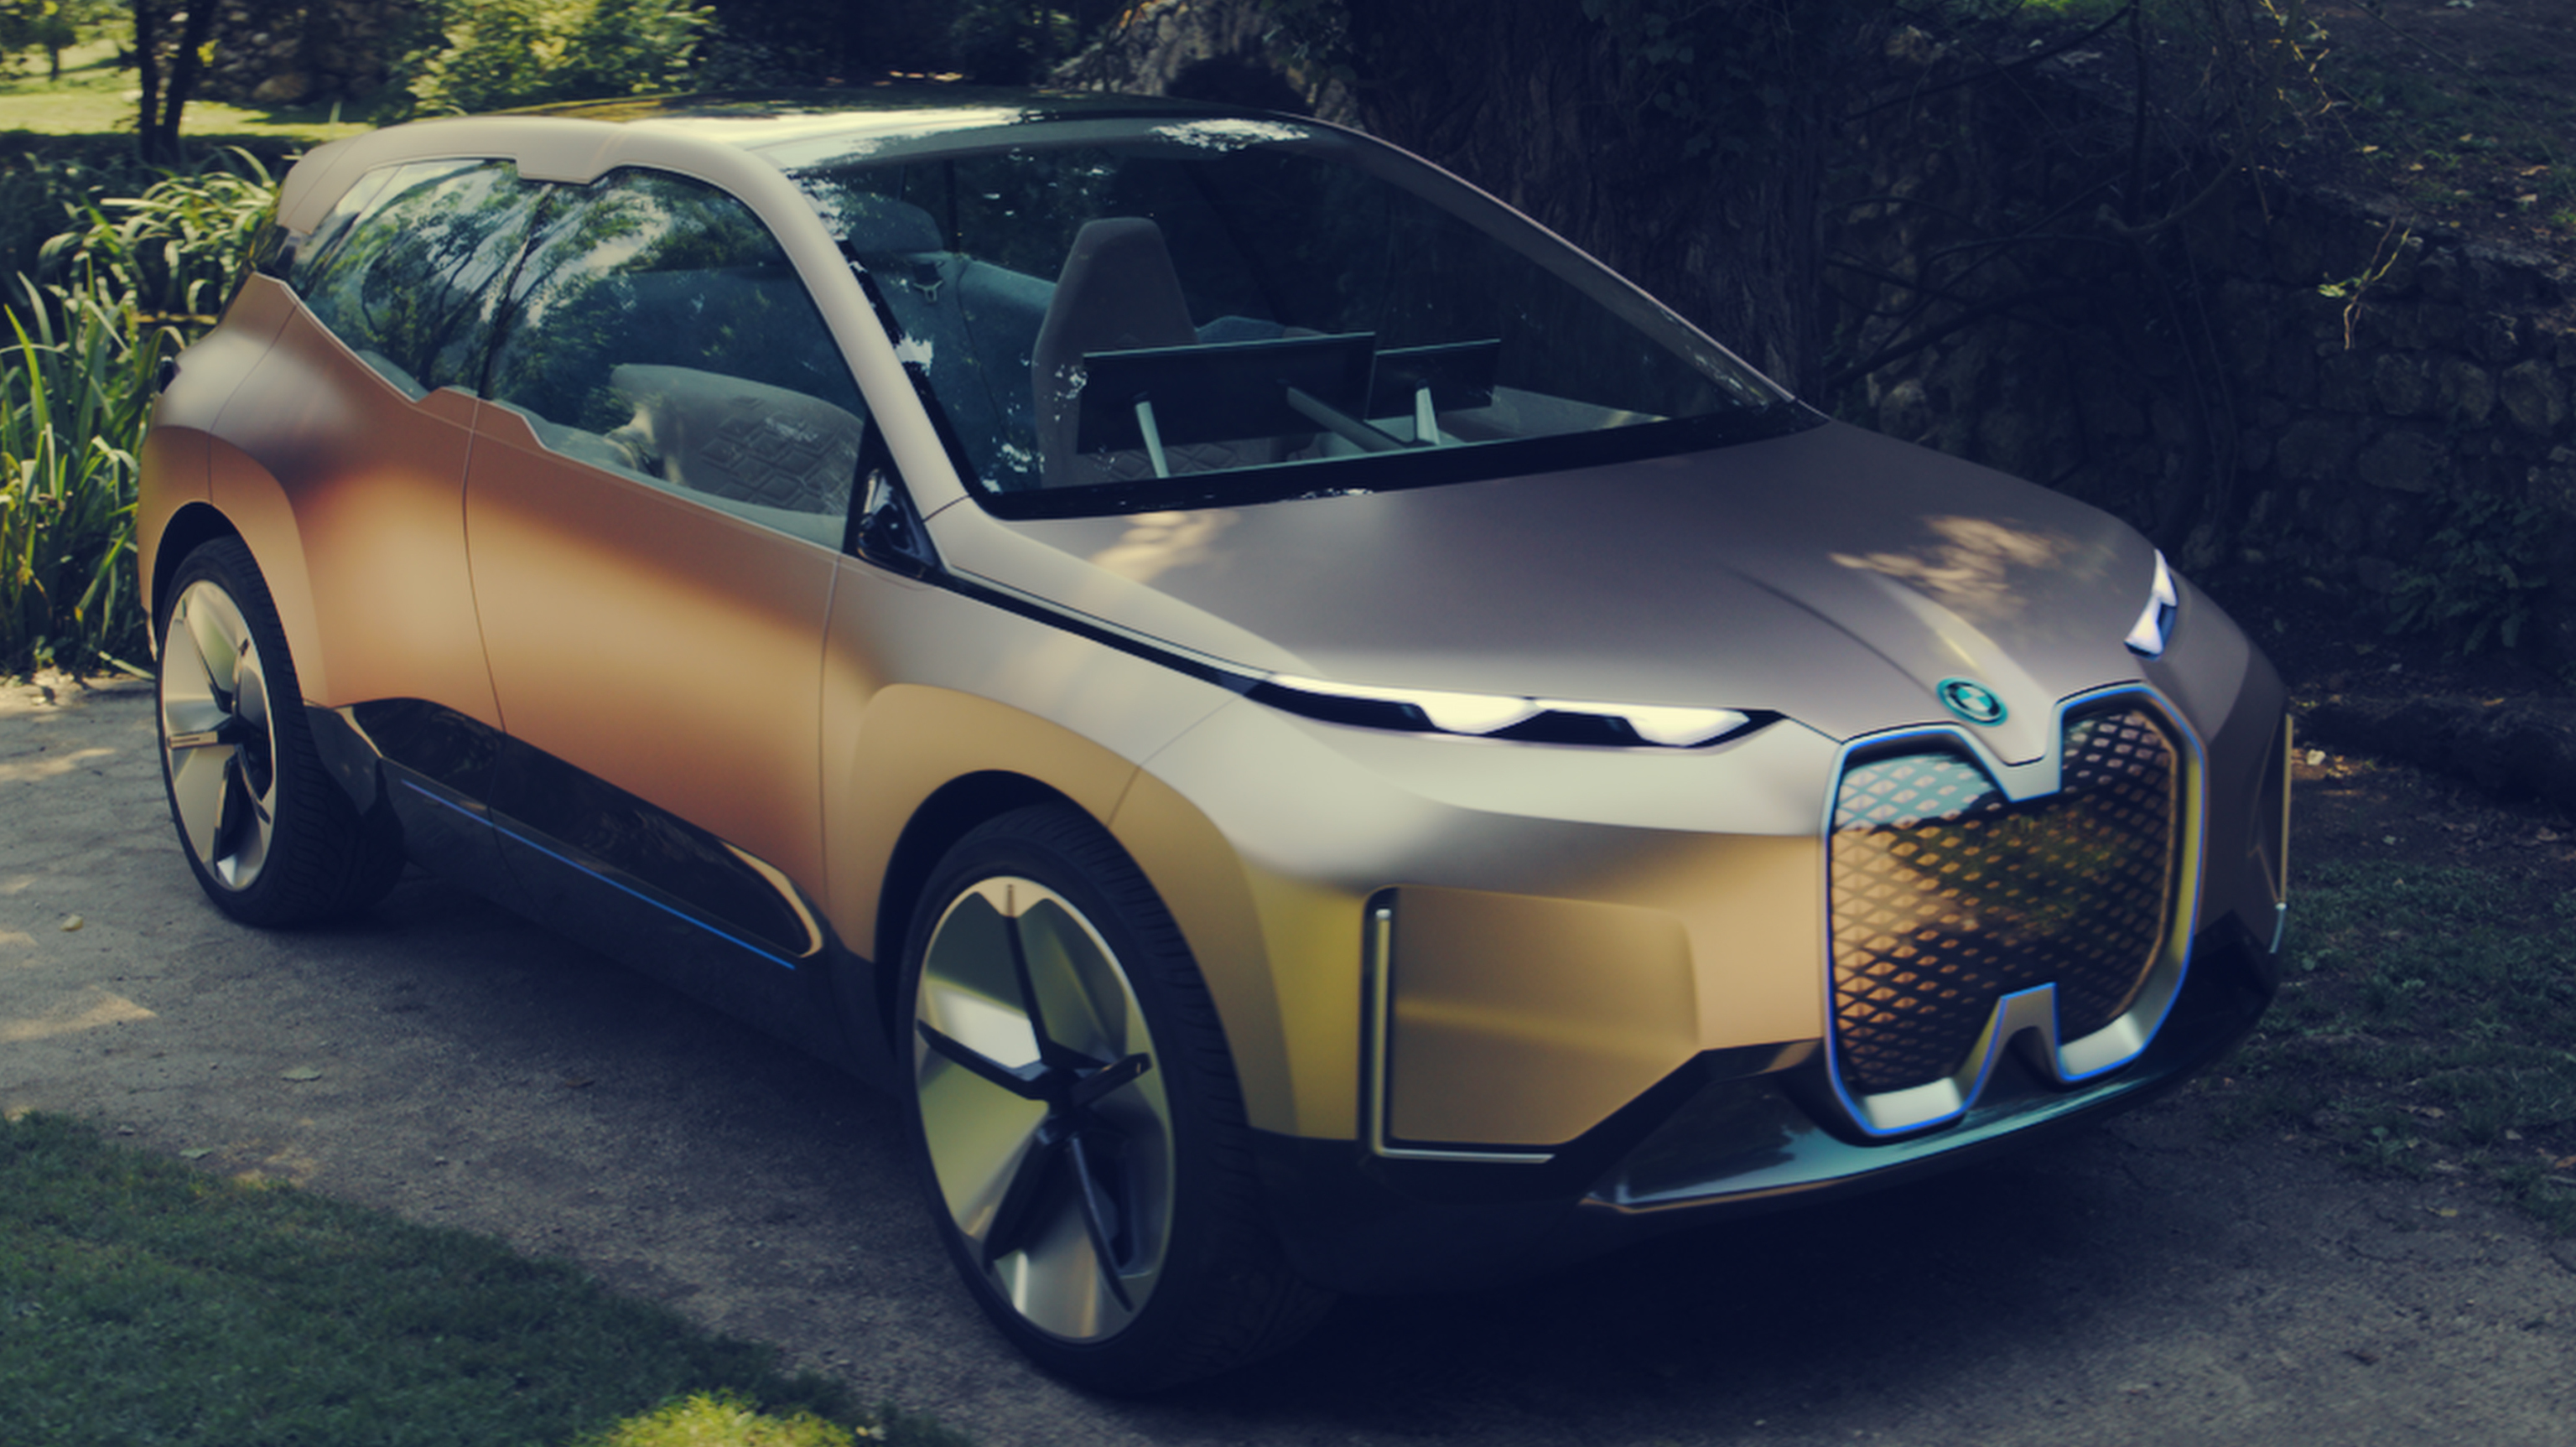 the bmw vision inext concept leaked before its official reveal 2018 leak  2